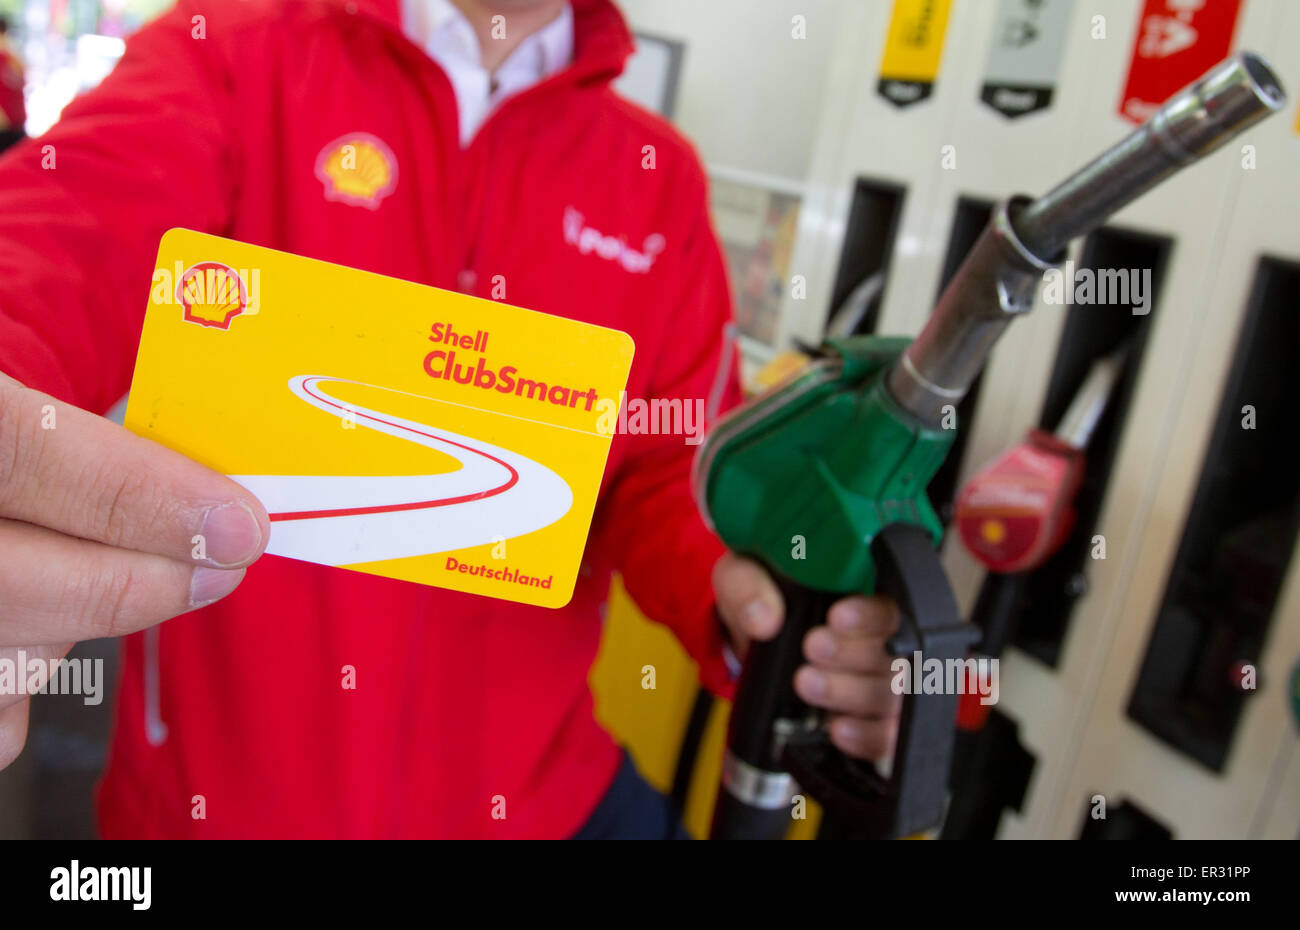 Hamburg, Germany. 22nd May, 2015. Patrick Carré, General Manager of Shell  gas station services in Germany, Austria, and Switzerland, holds up a Shell  ClubSmart Card and a gas pump during a photoshoot